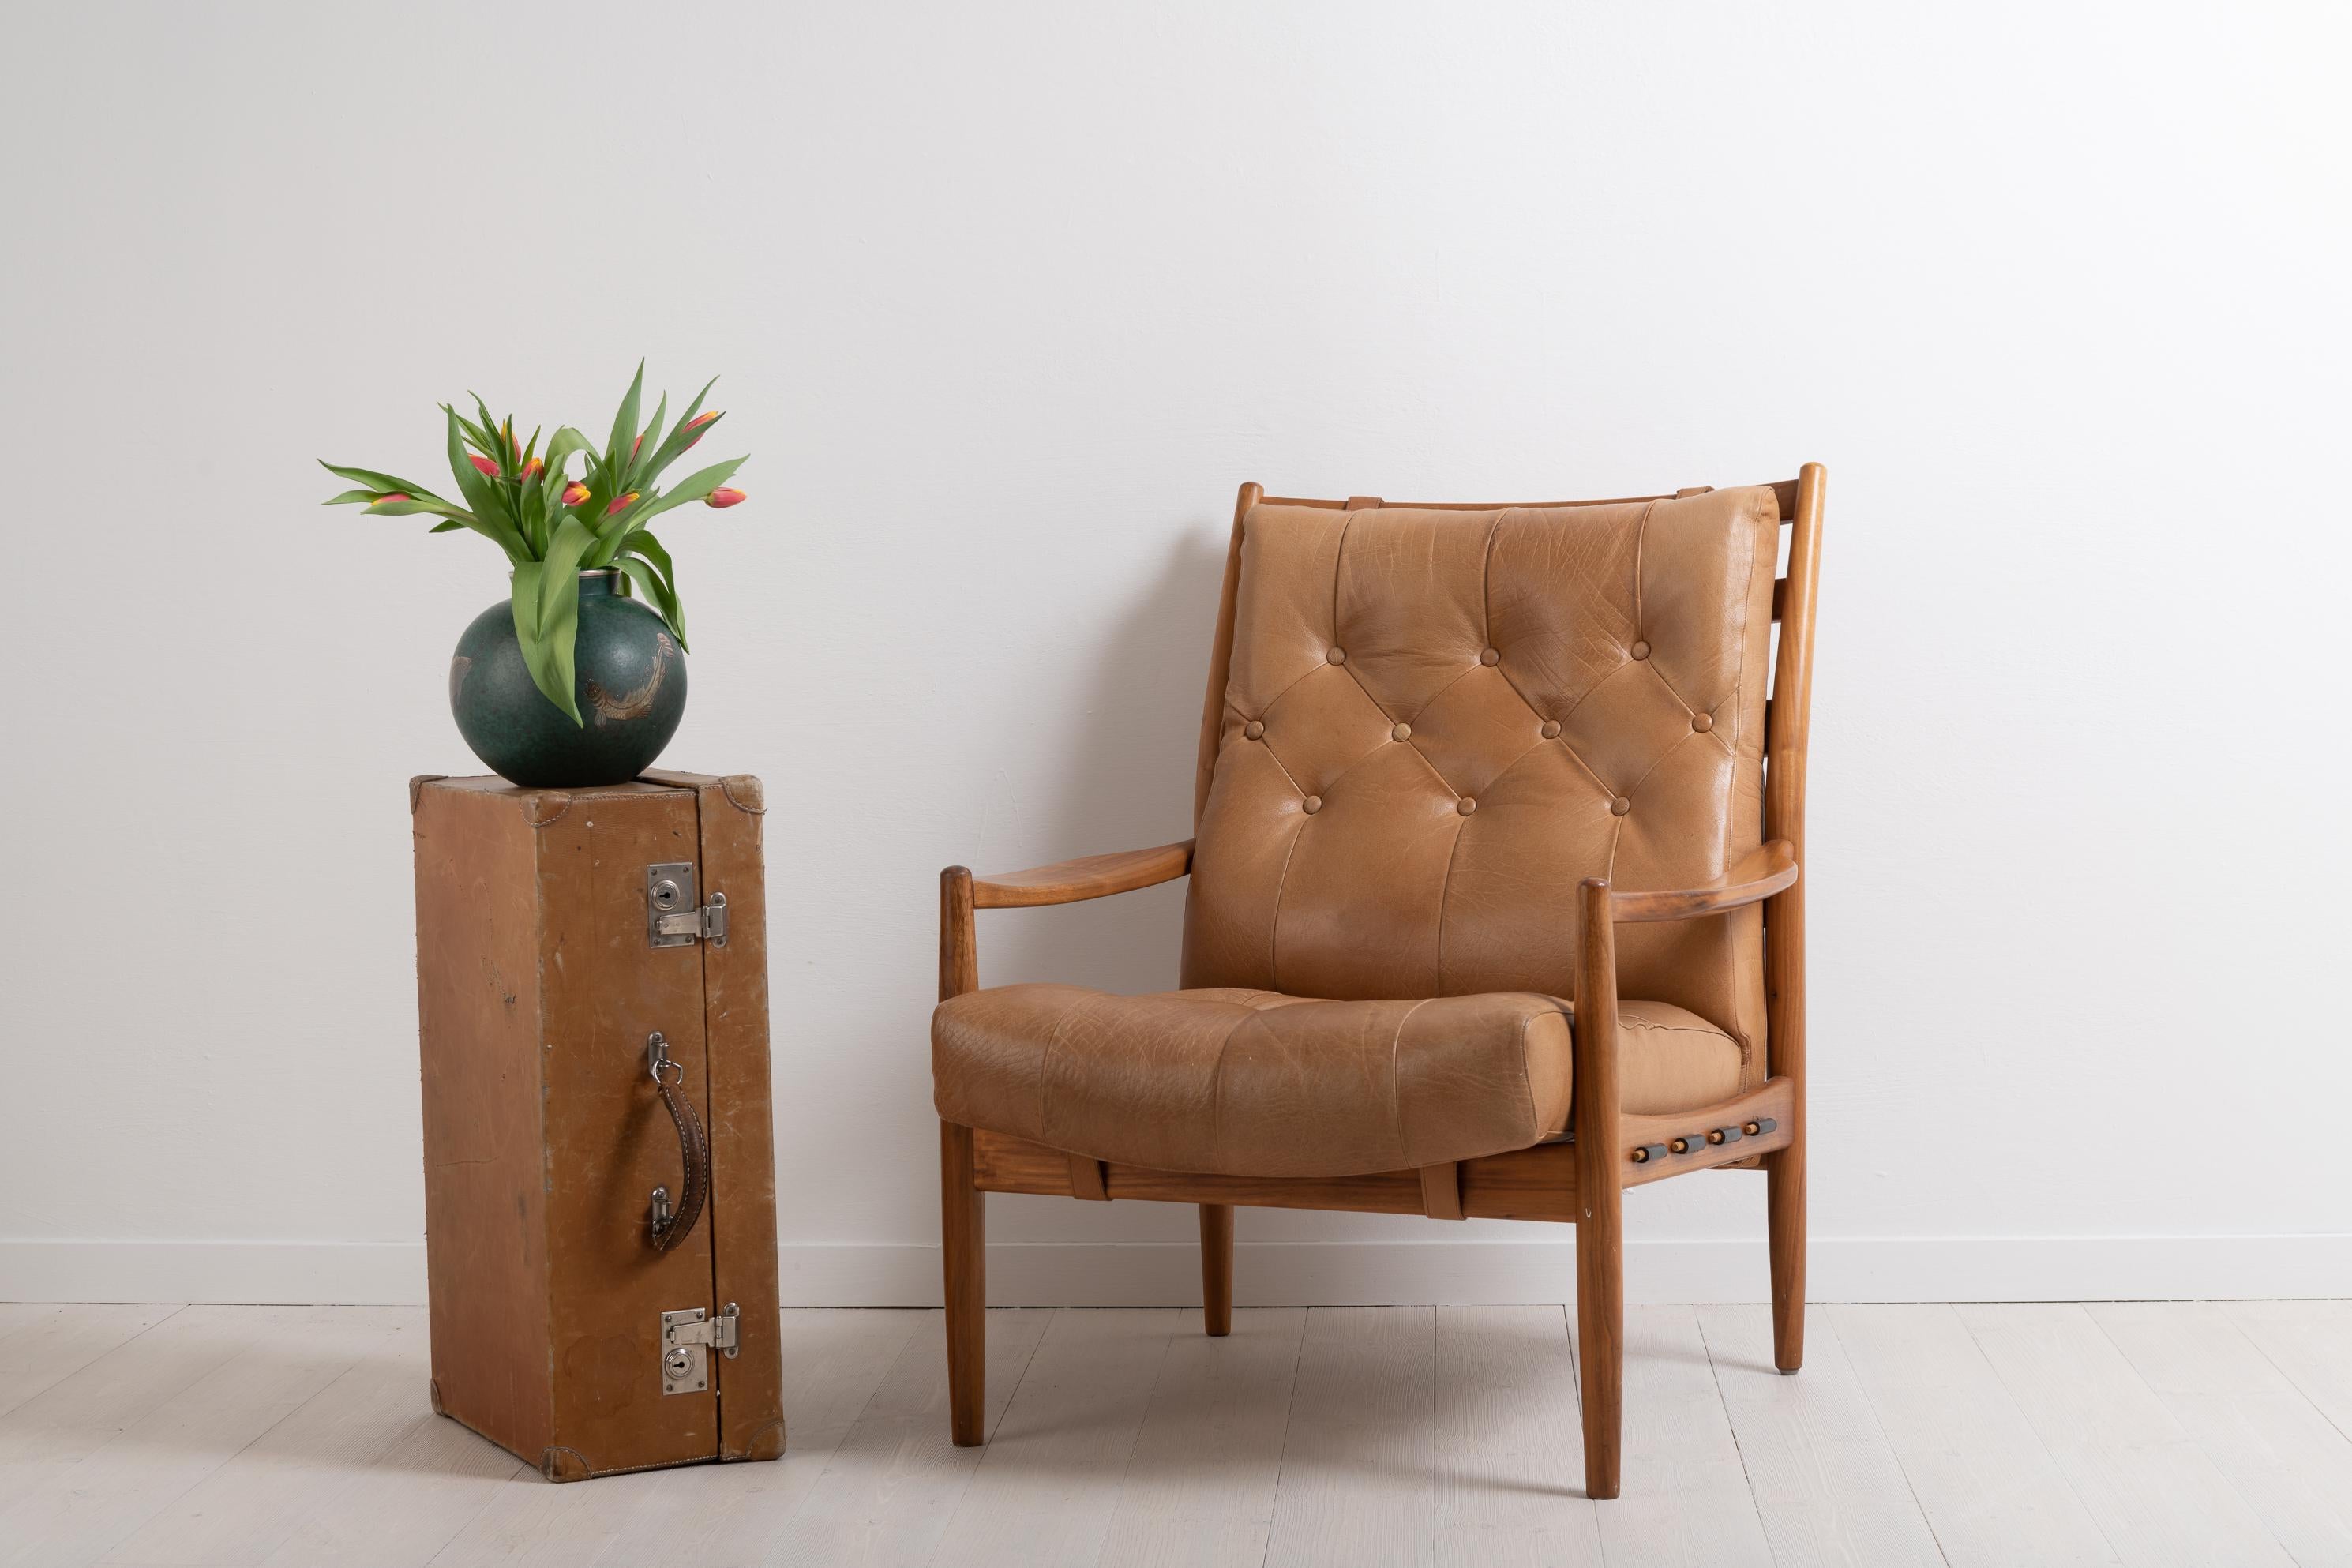 “Läckö Hög” by Swedish designer Ingemar Thillmark. The armchair is manufactured by OPE furniture, Olof Persson Möbler, in Jönköping during the second half of the 20th century. The frame is made from stained beech and the armchair has two loose